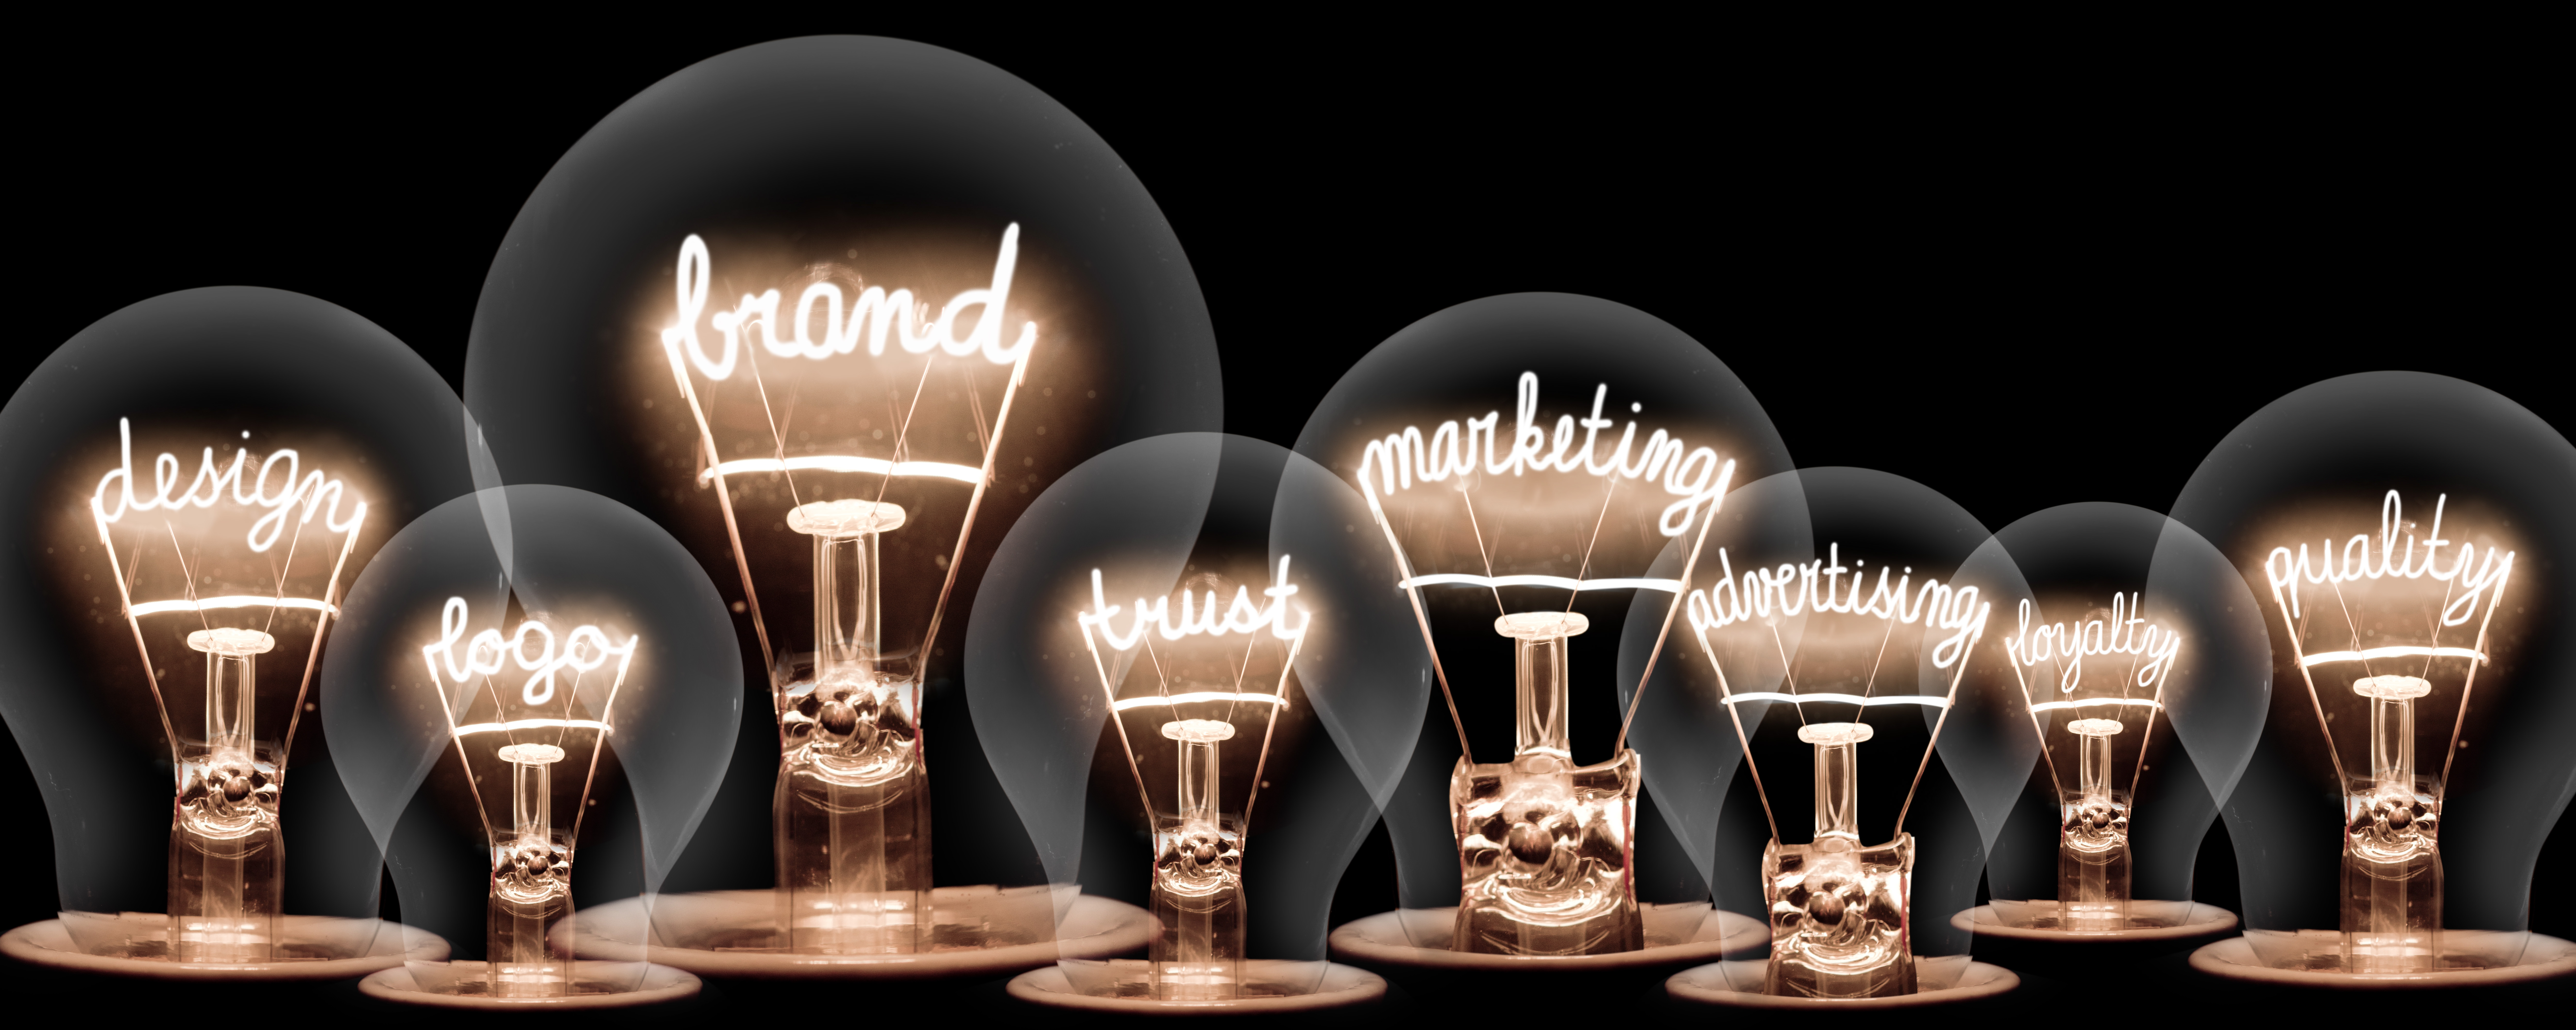 Branding Podcast - Marketing - Edison Bulbs Talking About Important Aspects Of Great Bran Building